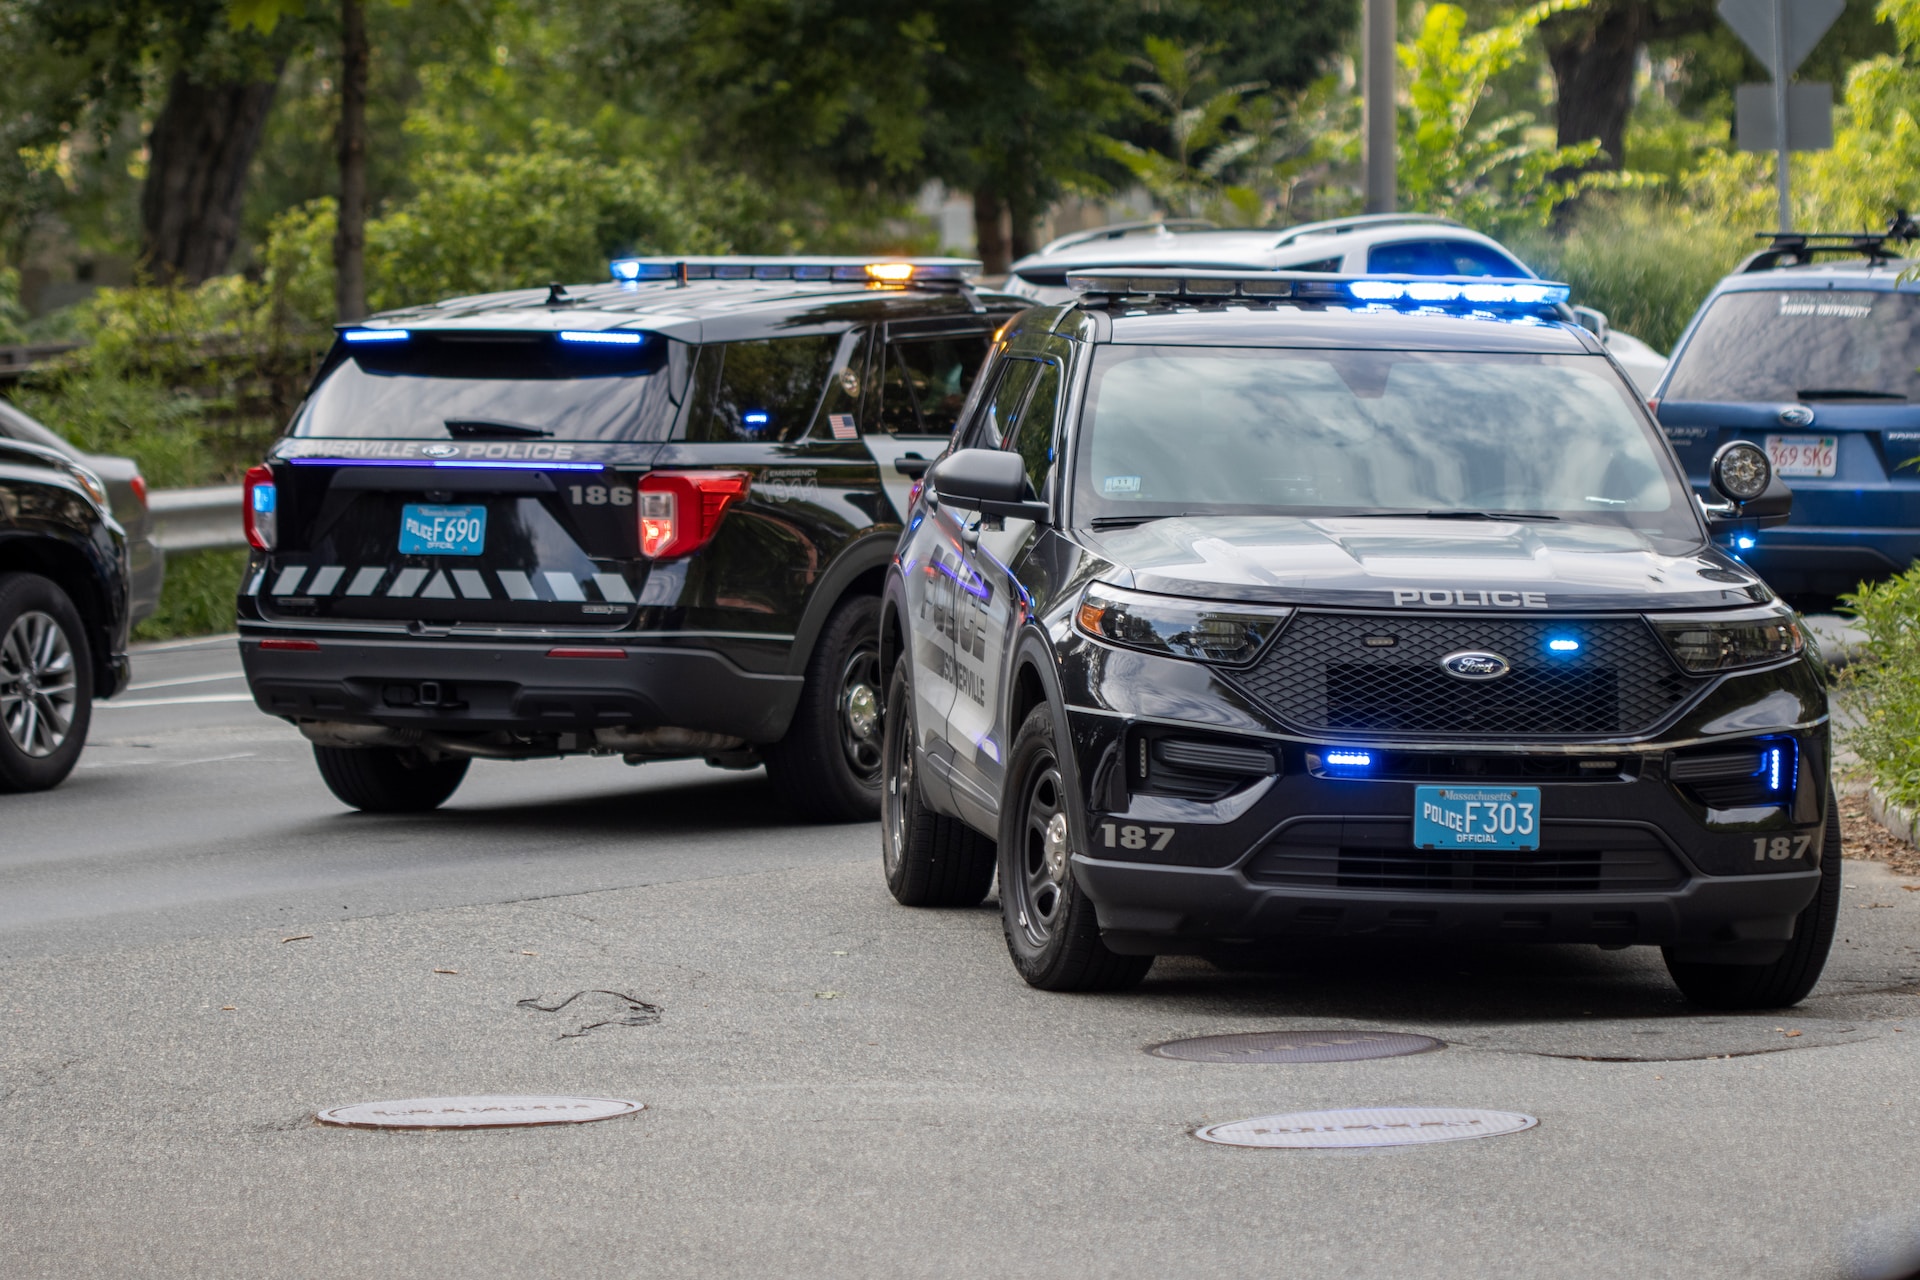 image of 2 U.S. police cars | Oracle Public Safety Services